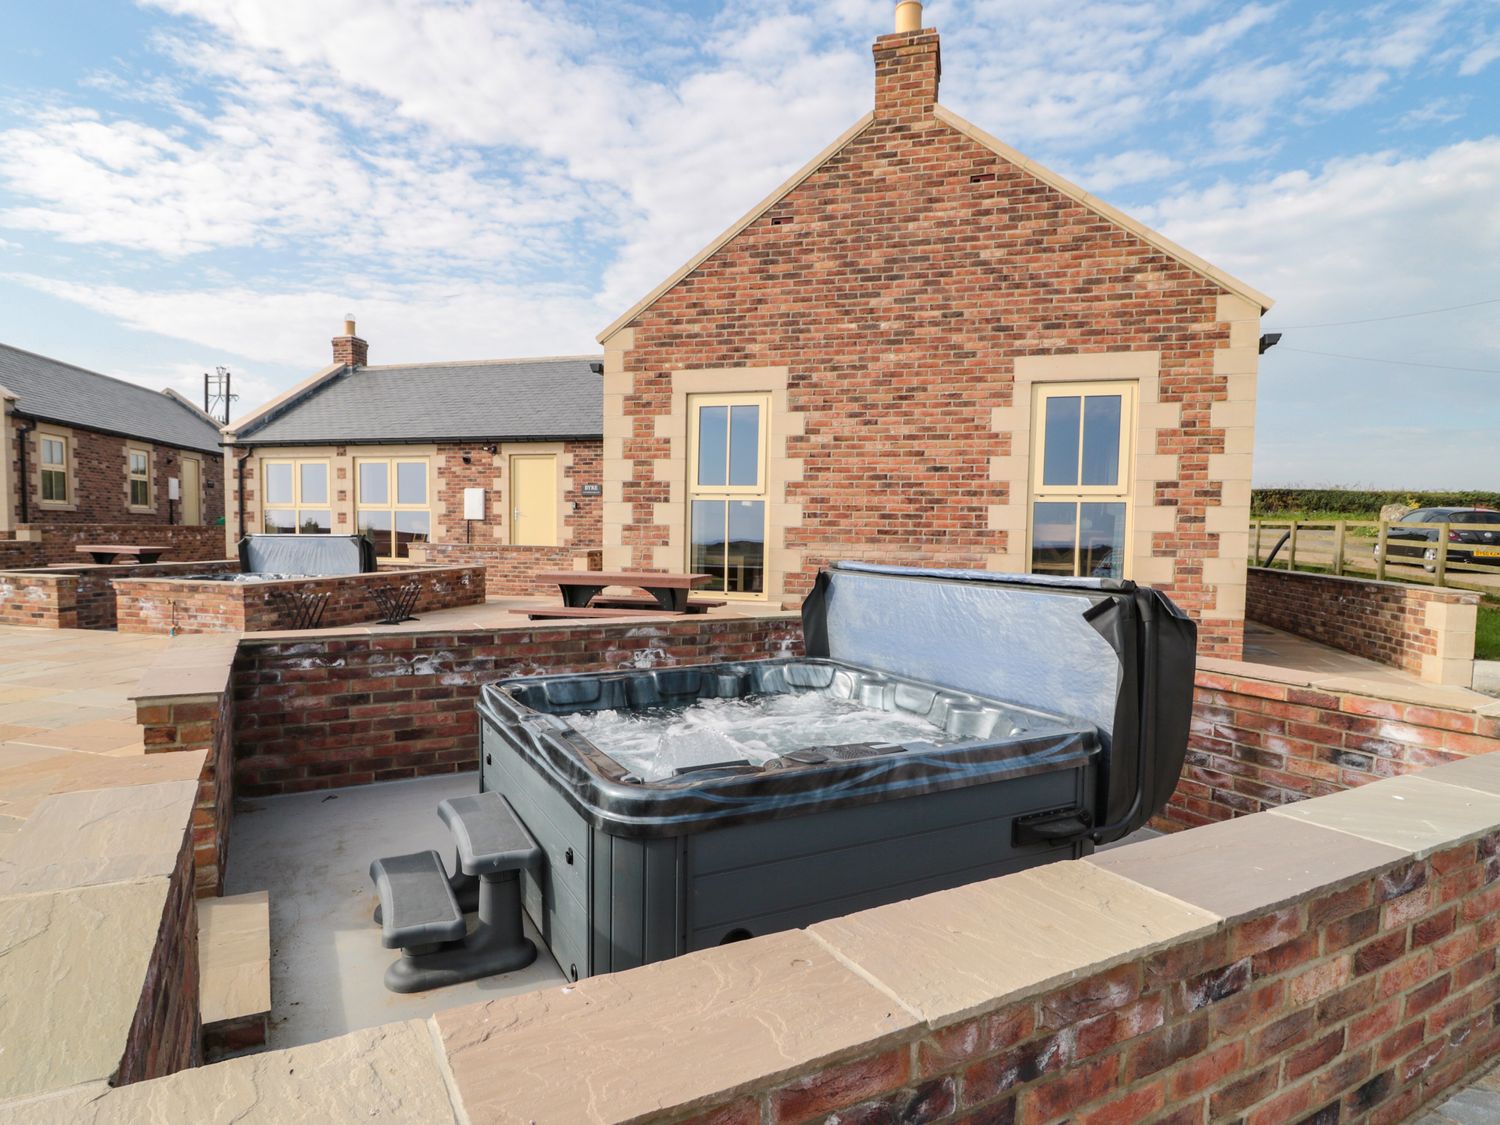 Byre Cottage in Embleton, Northumberland. Single-storey. Child-friendly. Spacious patio with hot tub